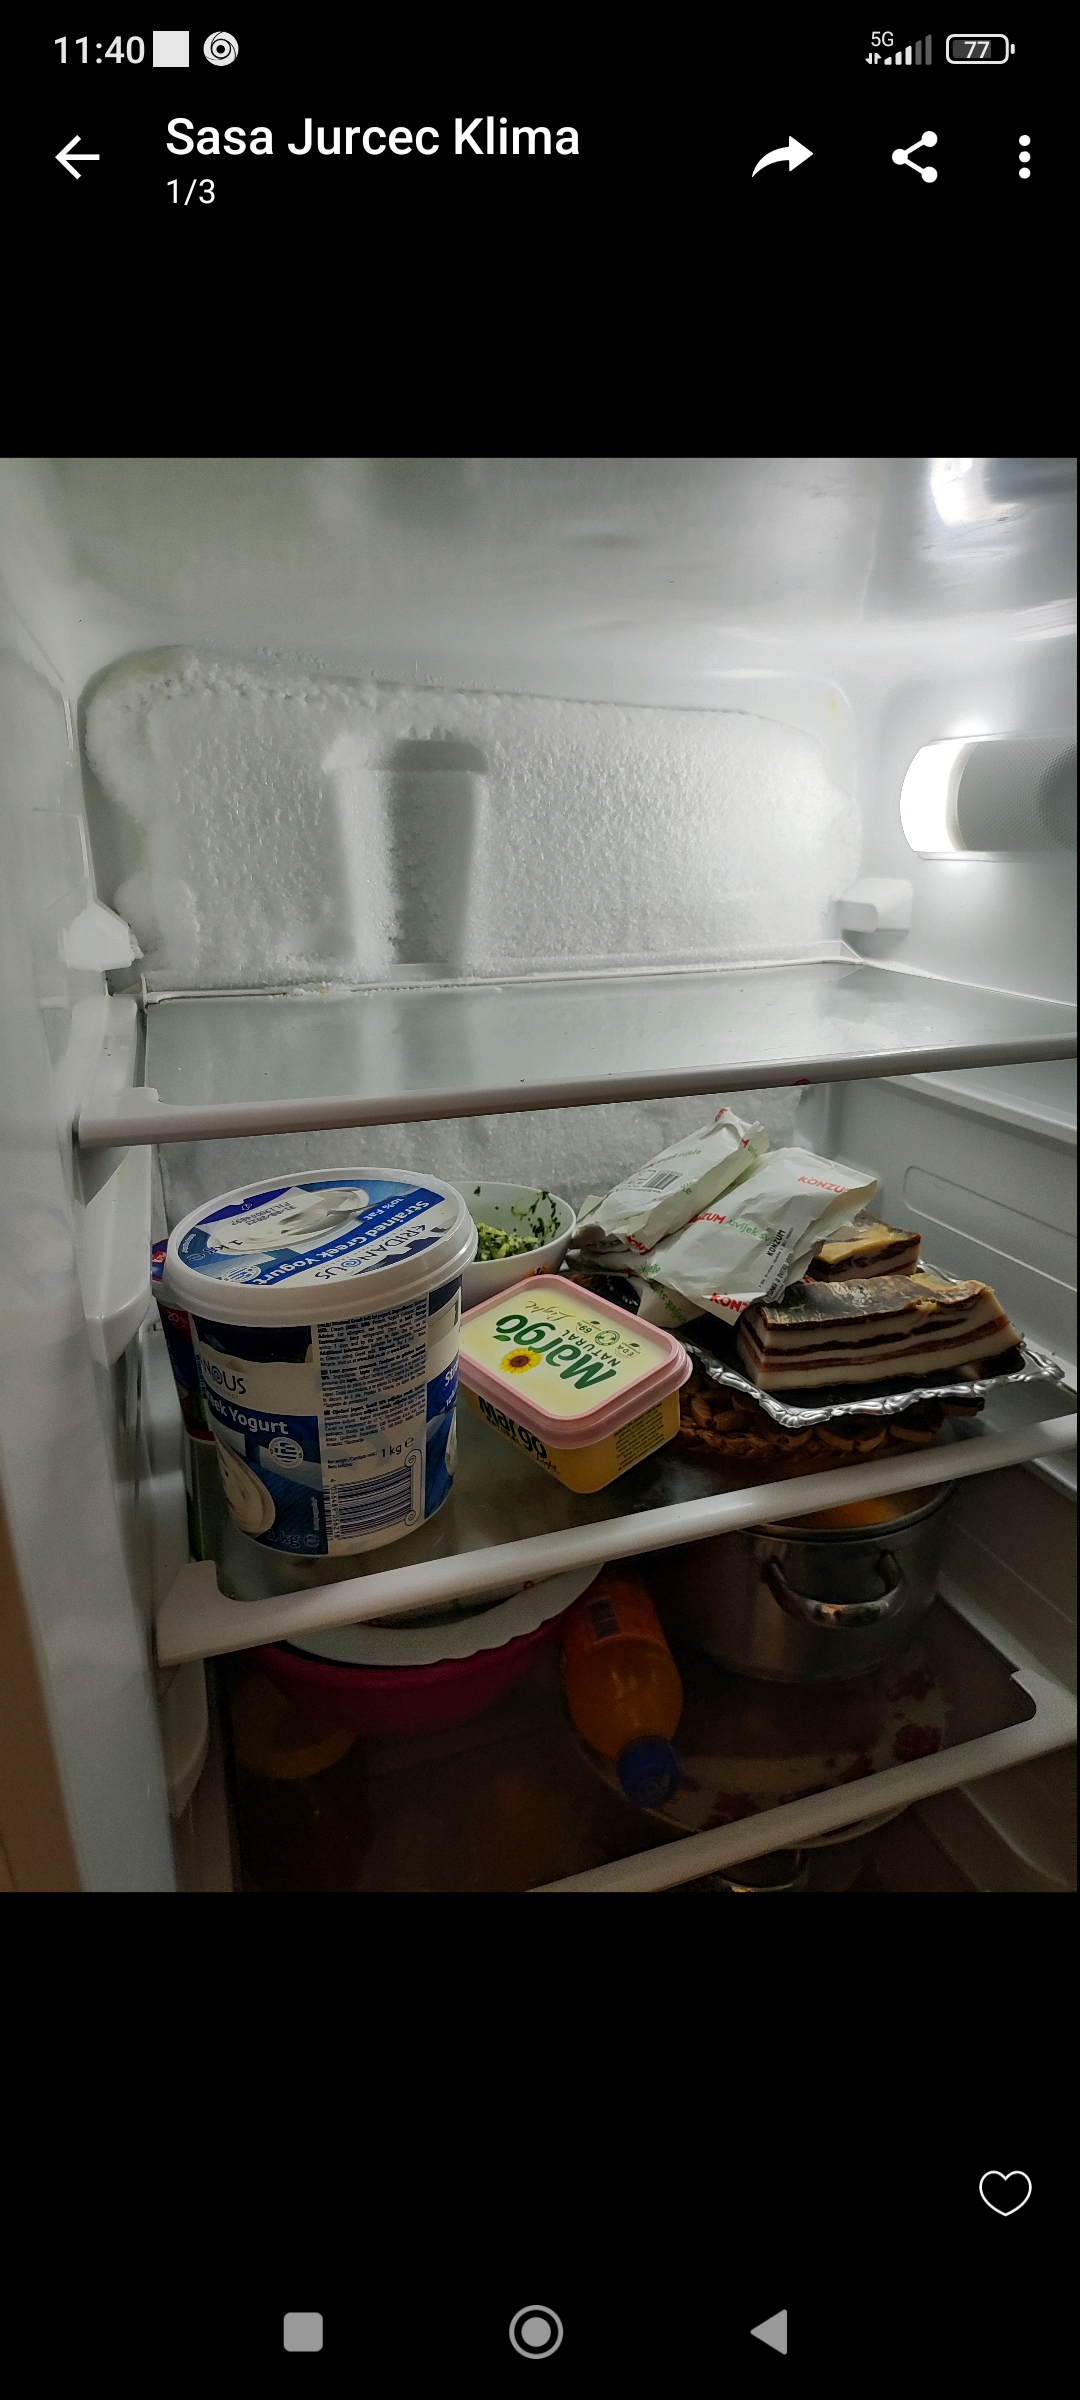 Ice forms in the background of the refrigerator
Picture attached
What to do?